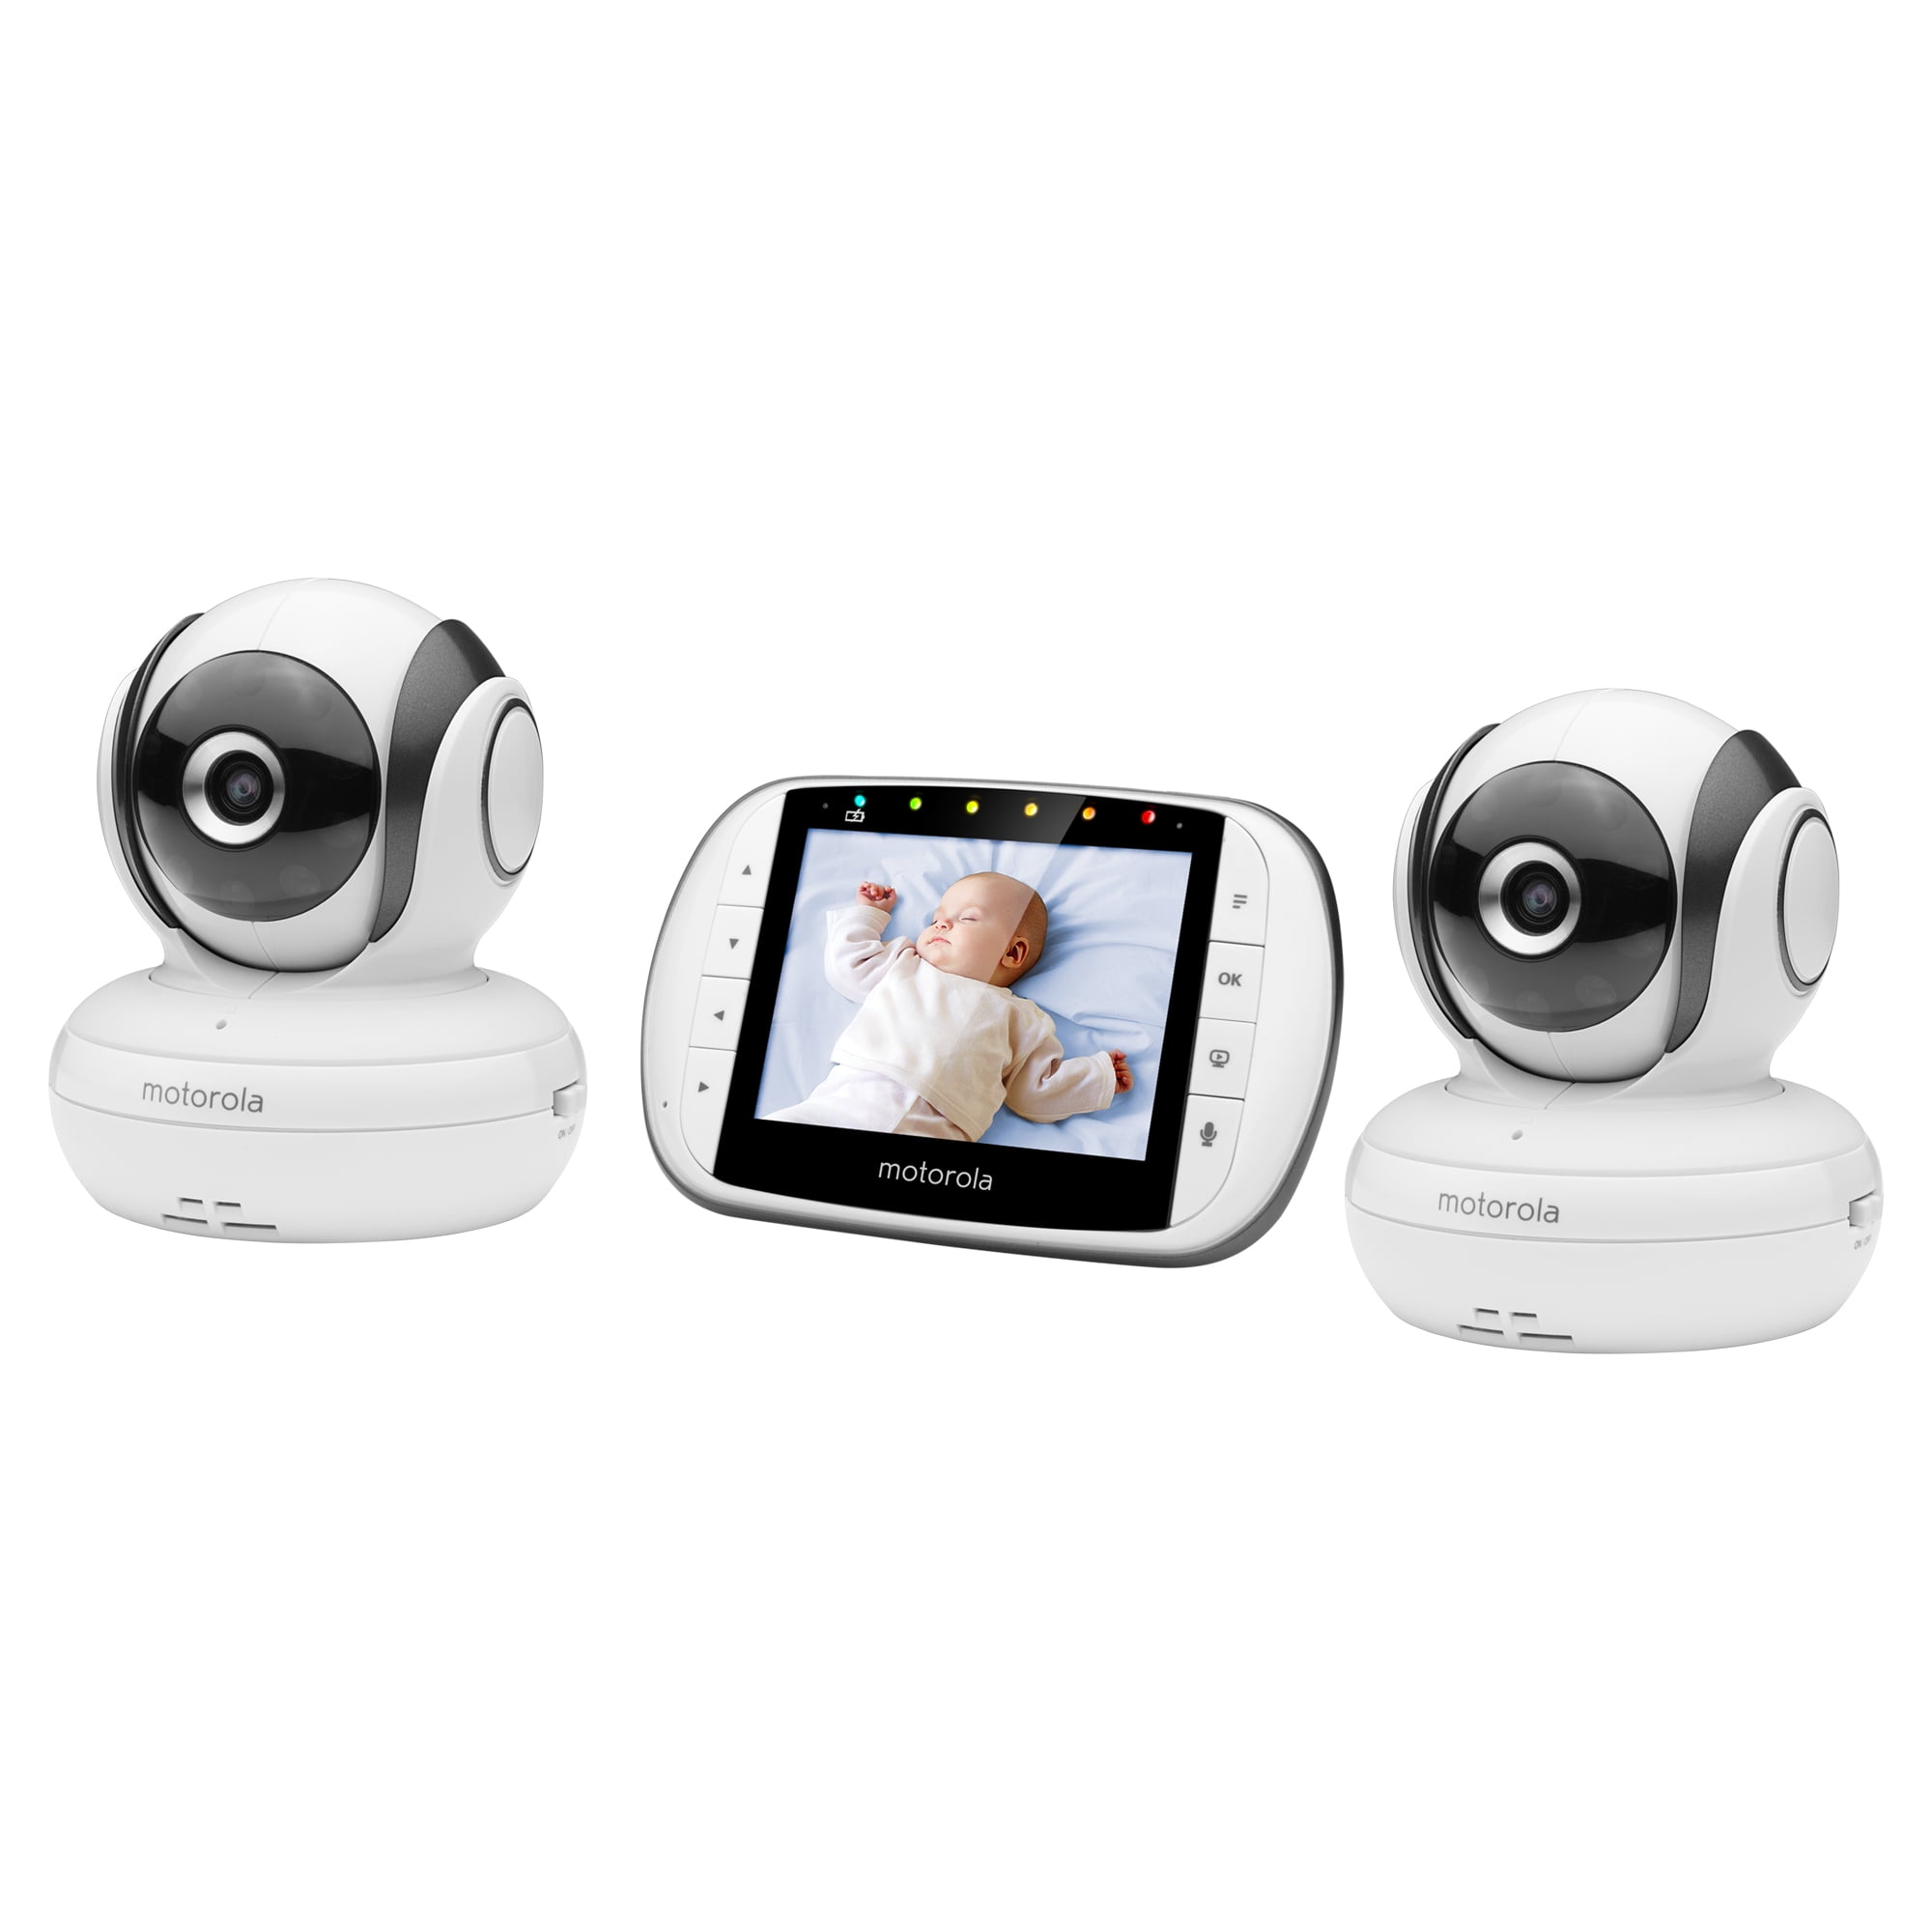 video baby monitor two cameras